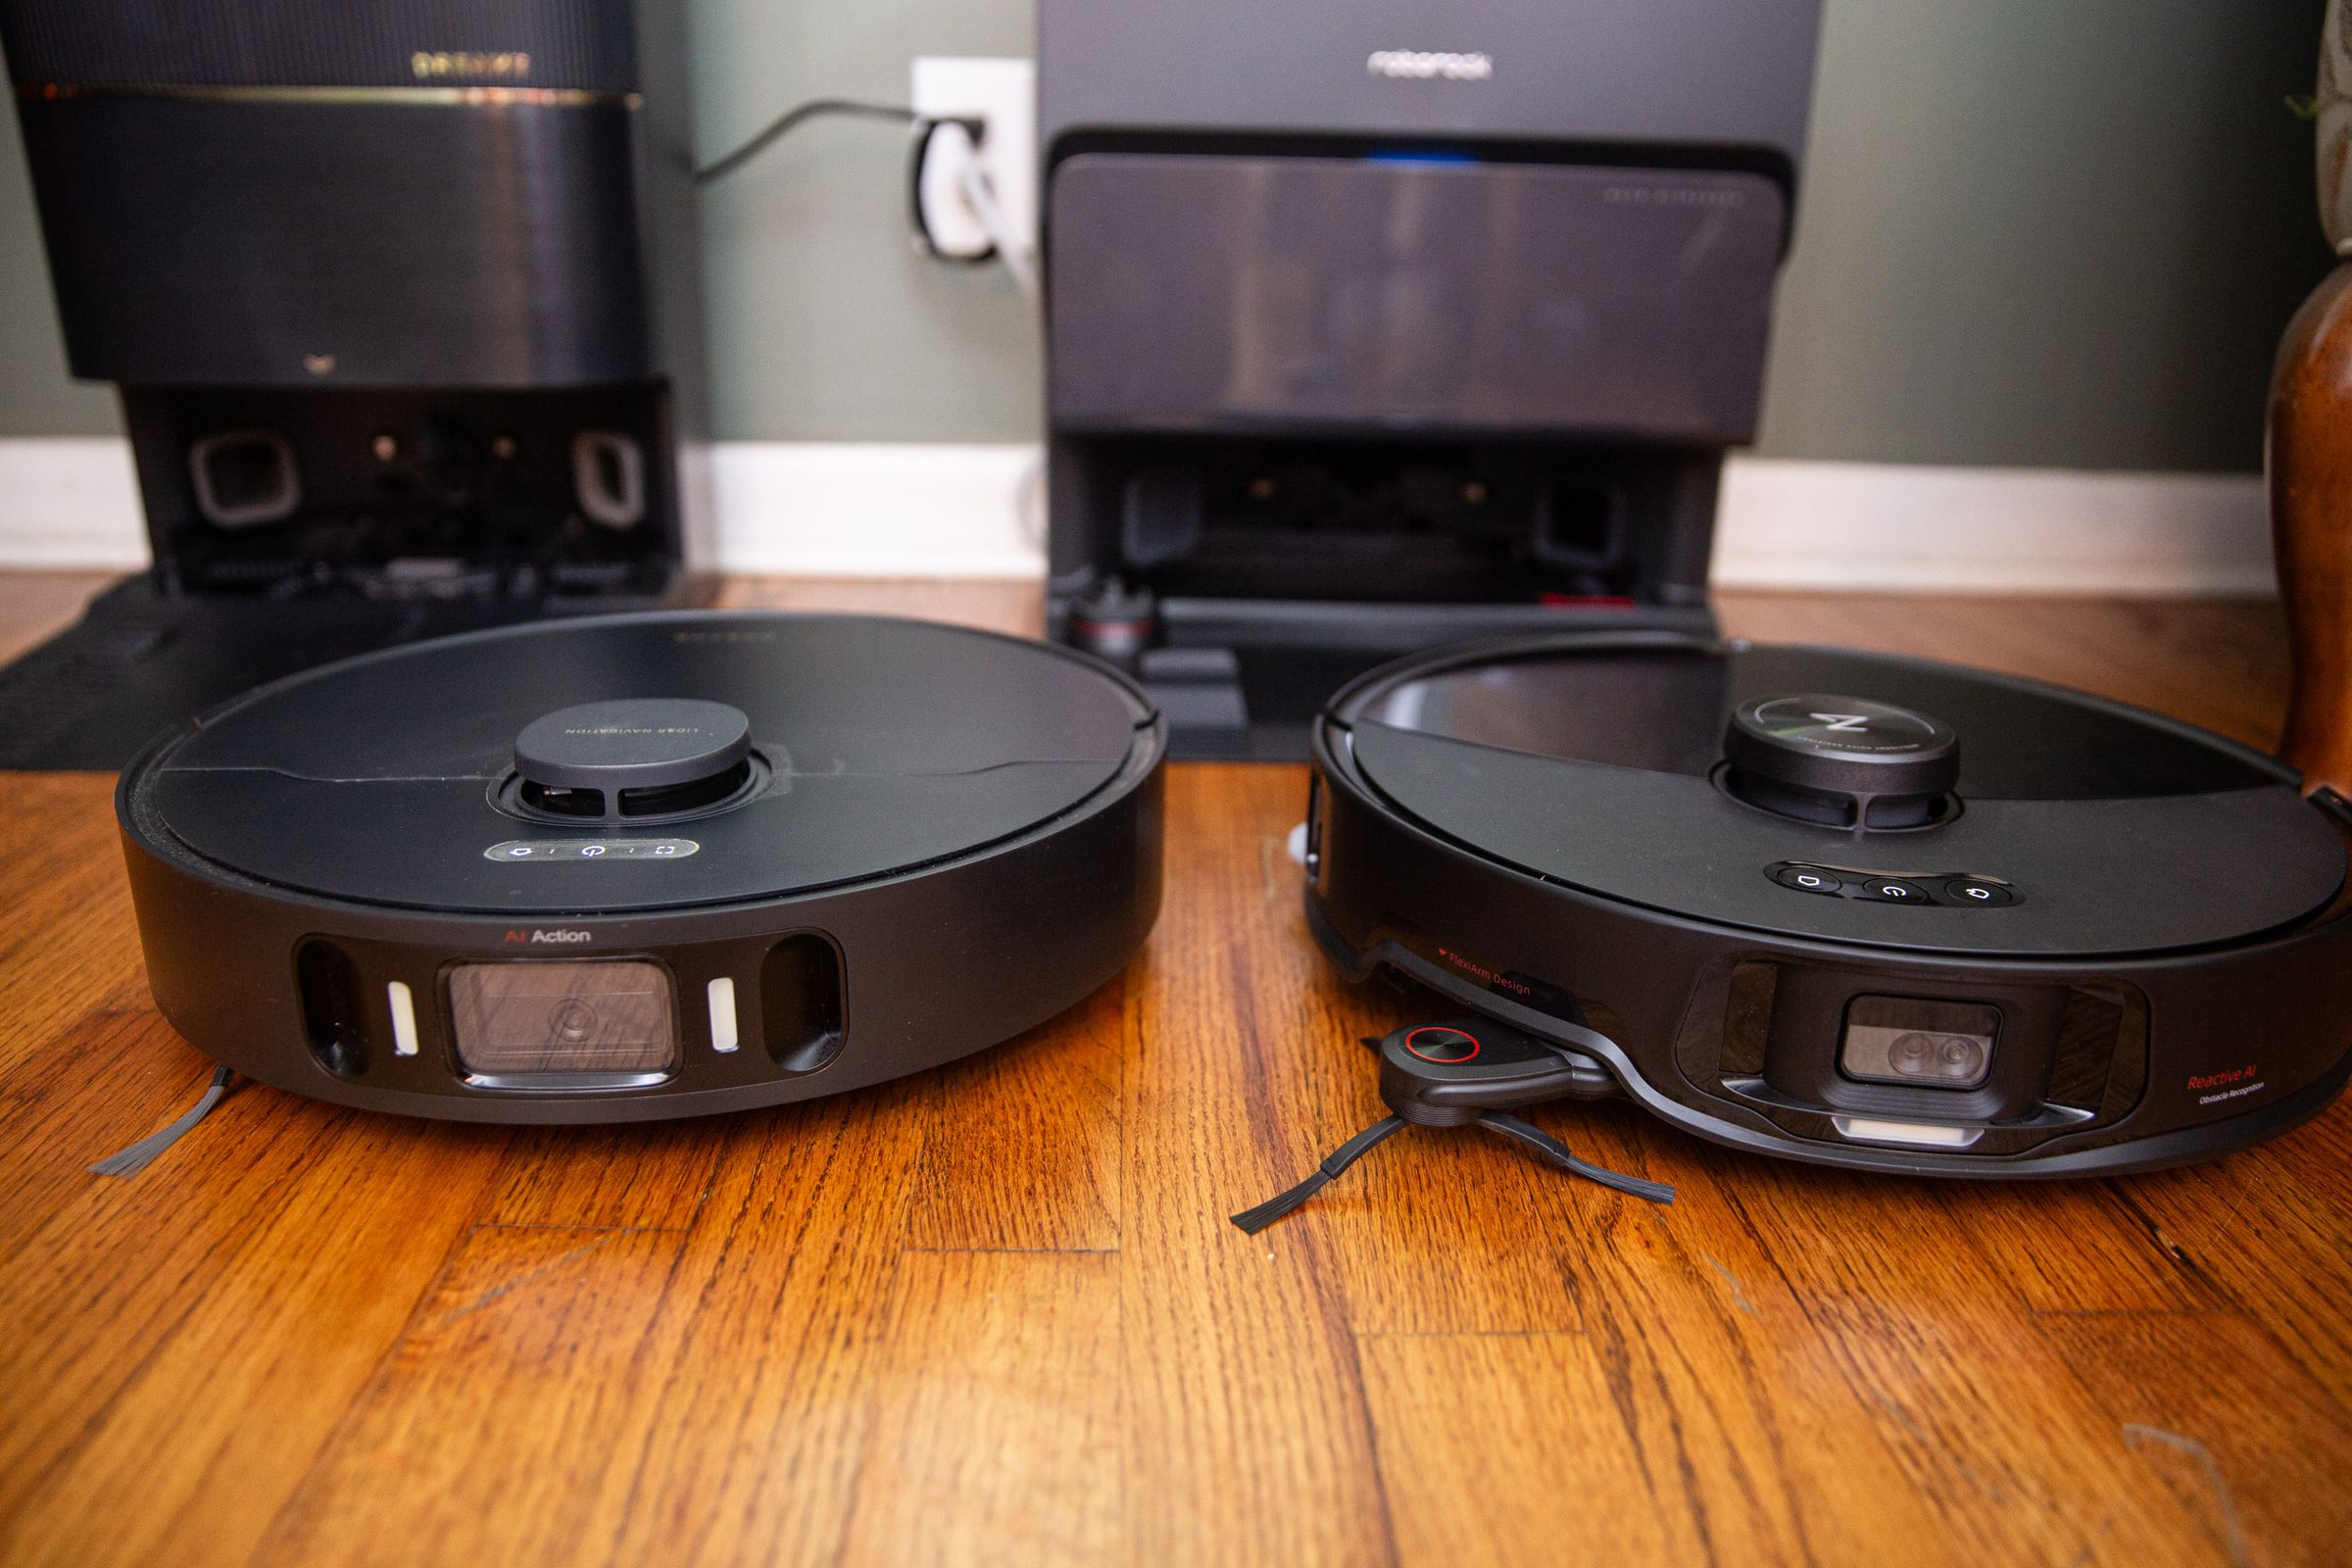 The Dreame X30 Ultra (left) and the Roborock S8 MaxV Ultra are both impressive robot vacuum mops.